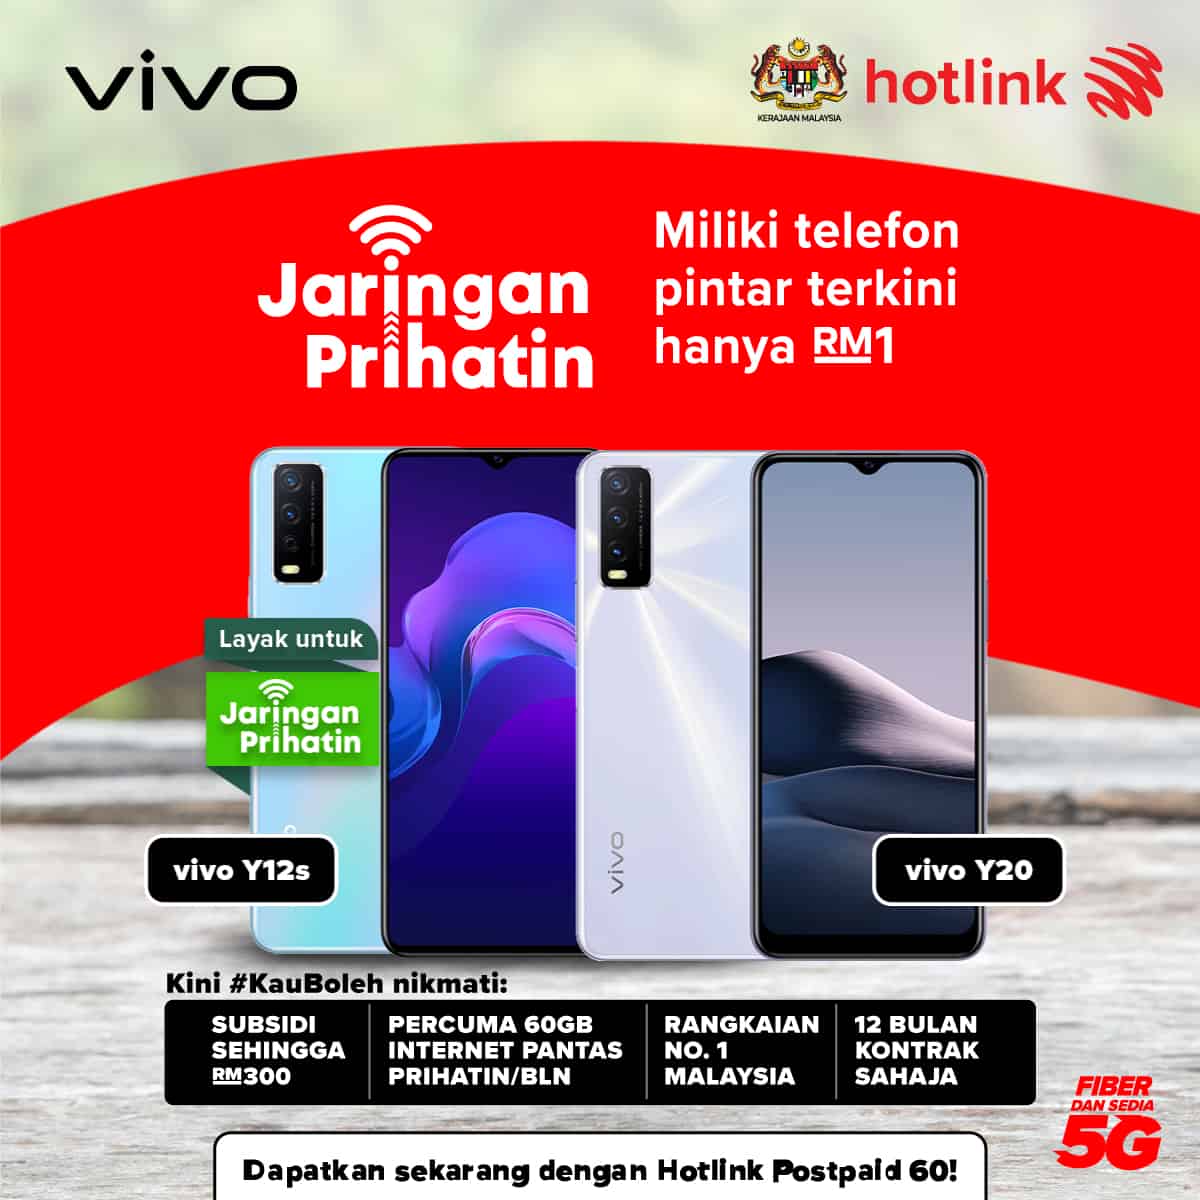 Read more about the article vivo smartphones are now available from as low as RM1 under Jaringan Prihatin through Hotlink Postpaid